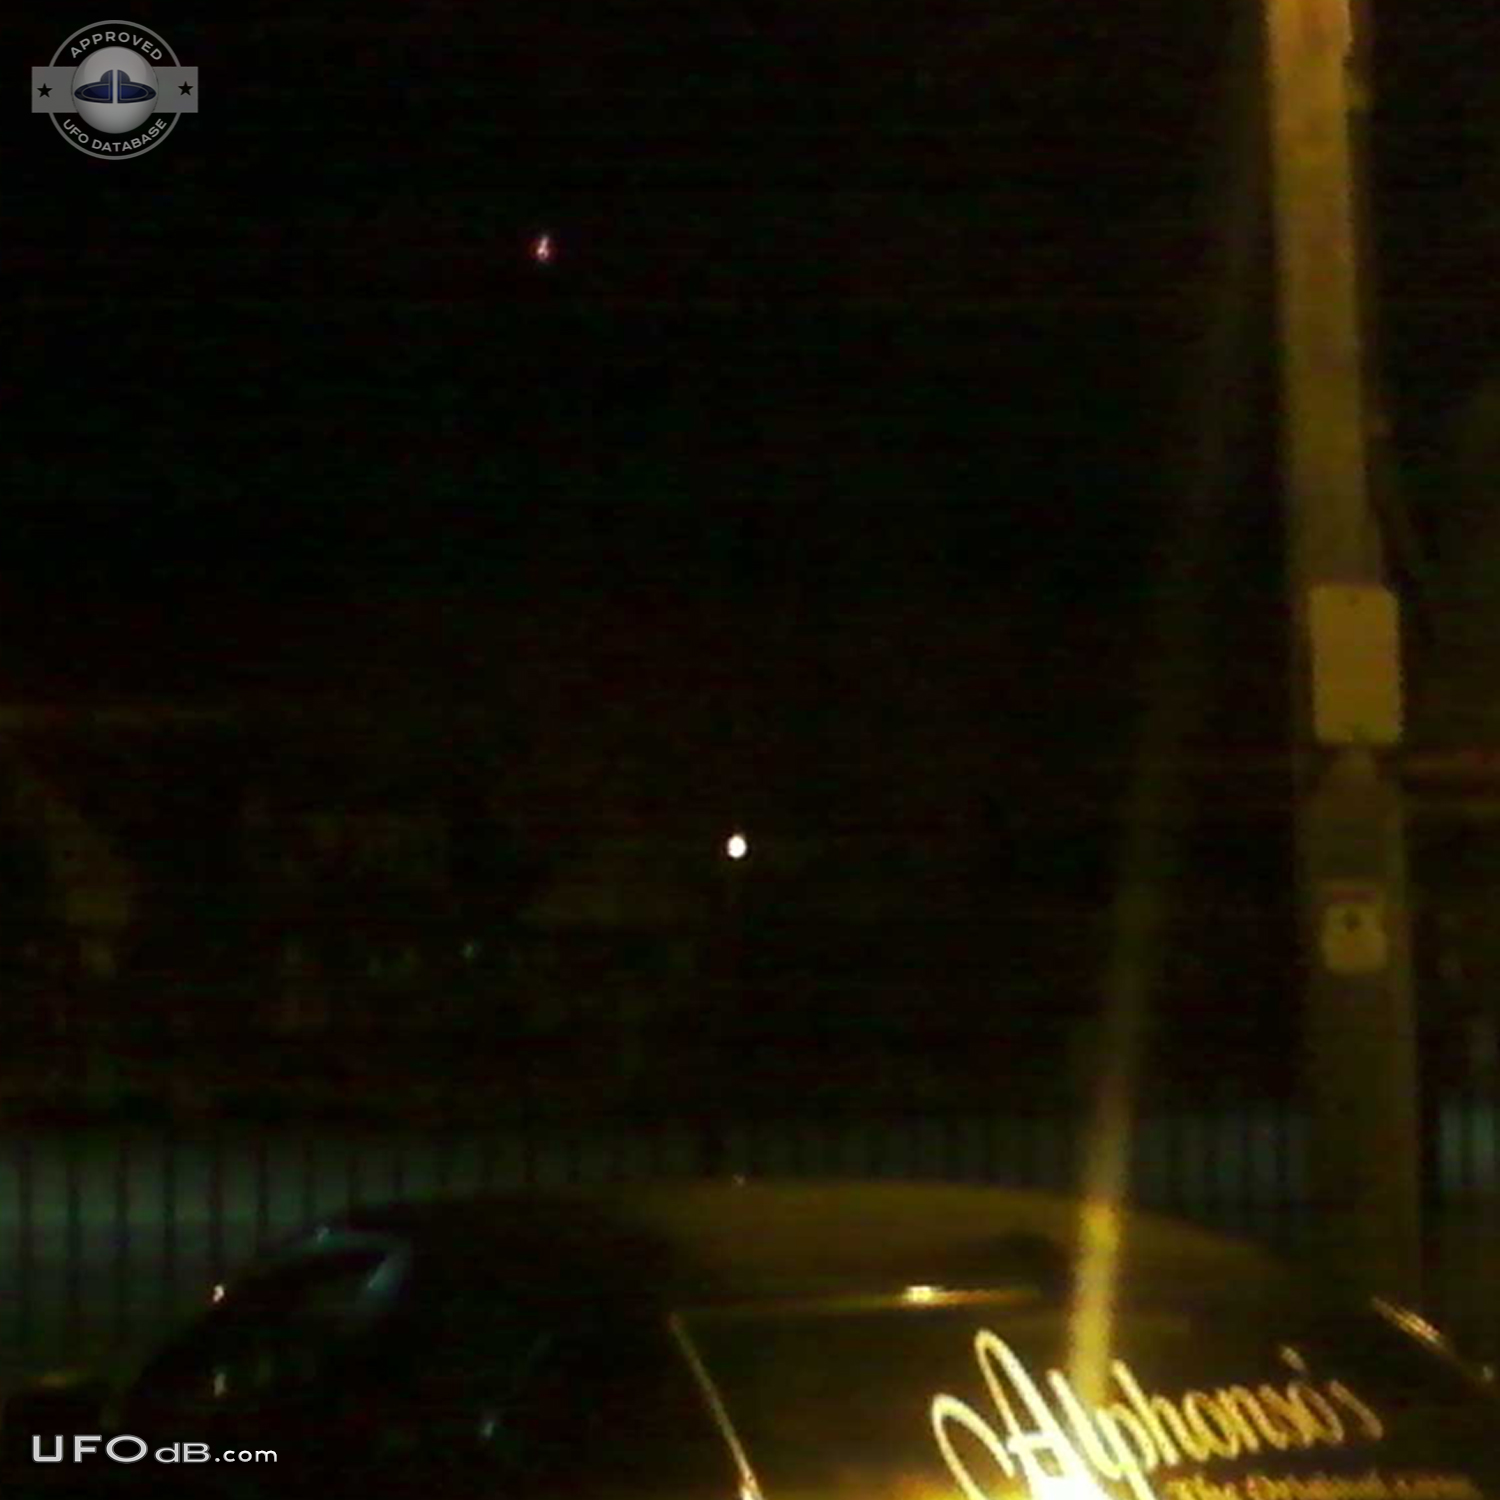 Huge red ball UFO seen by a group of people in West Allis, Wisconsin UFO Picture #375-2